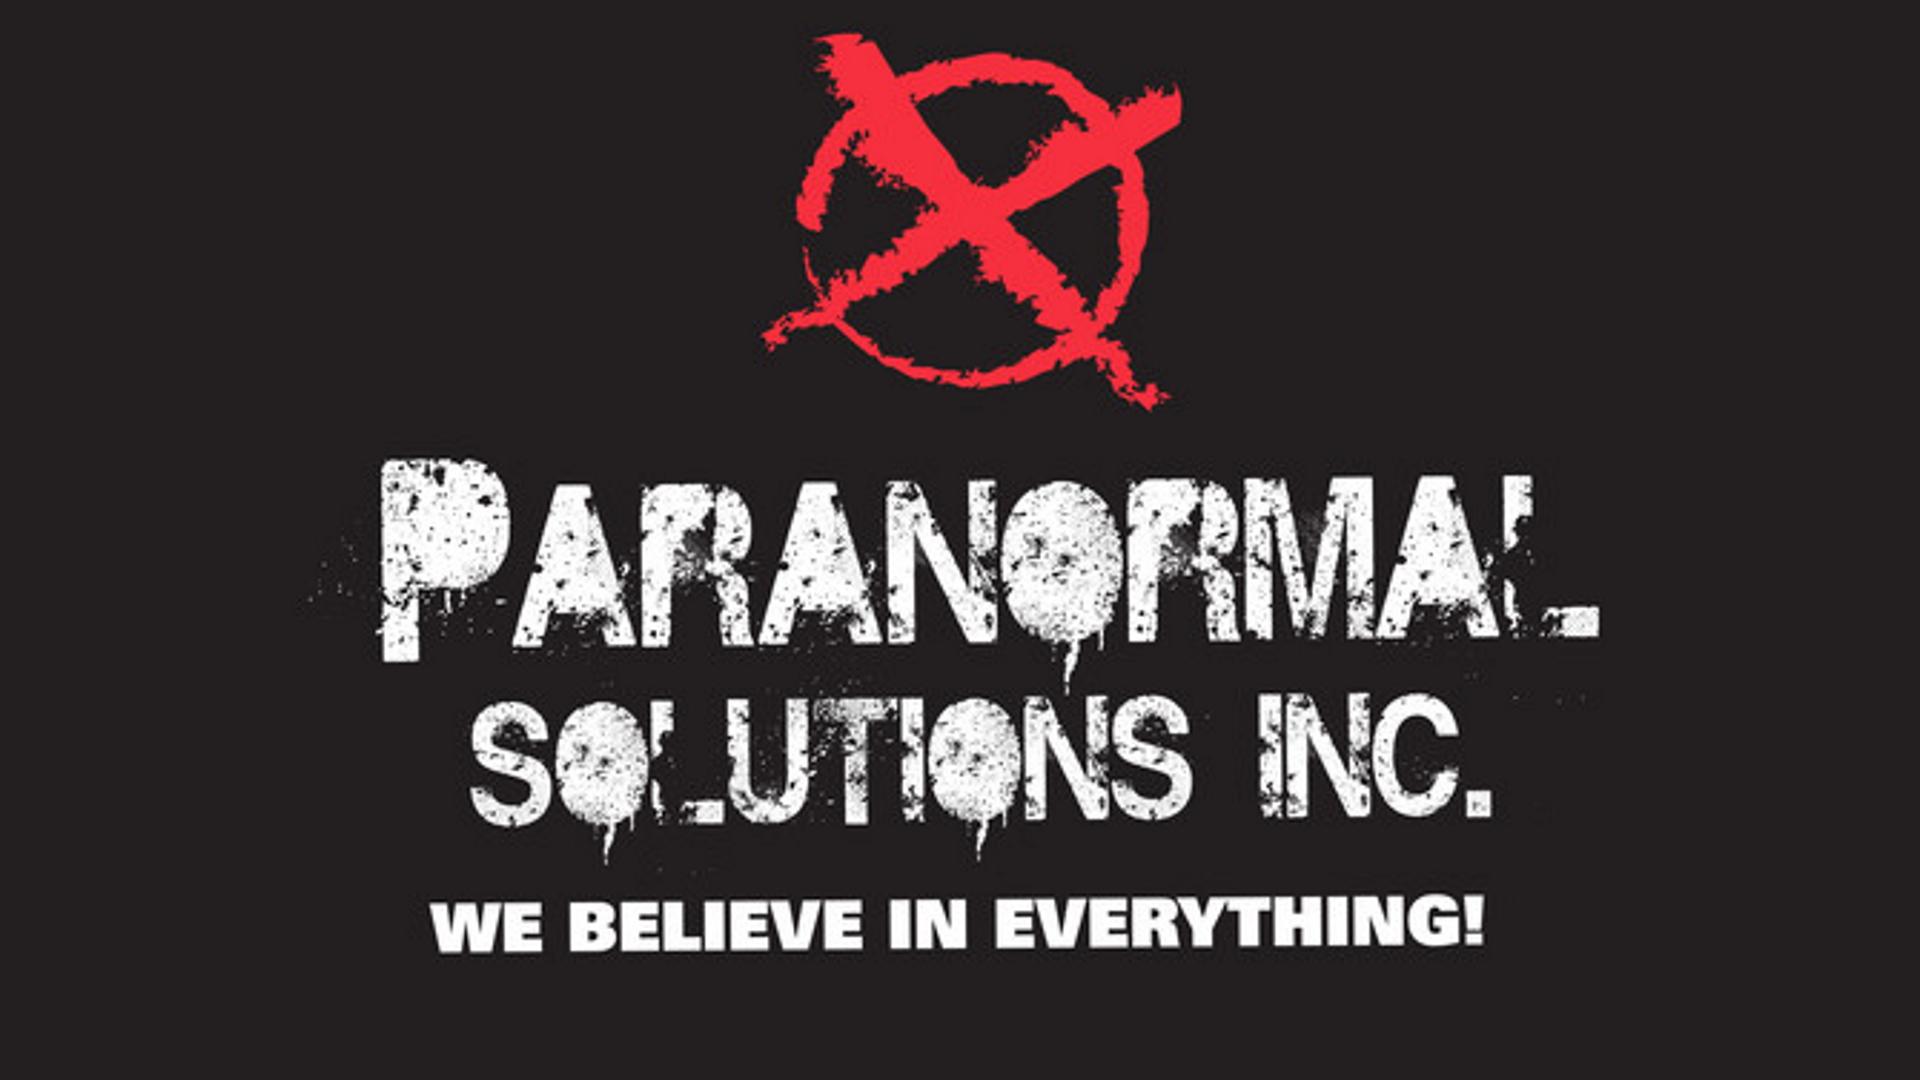 Paranormal Solutions Inc.